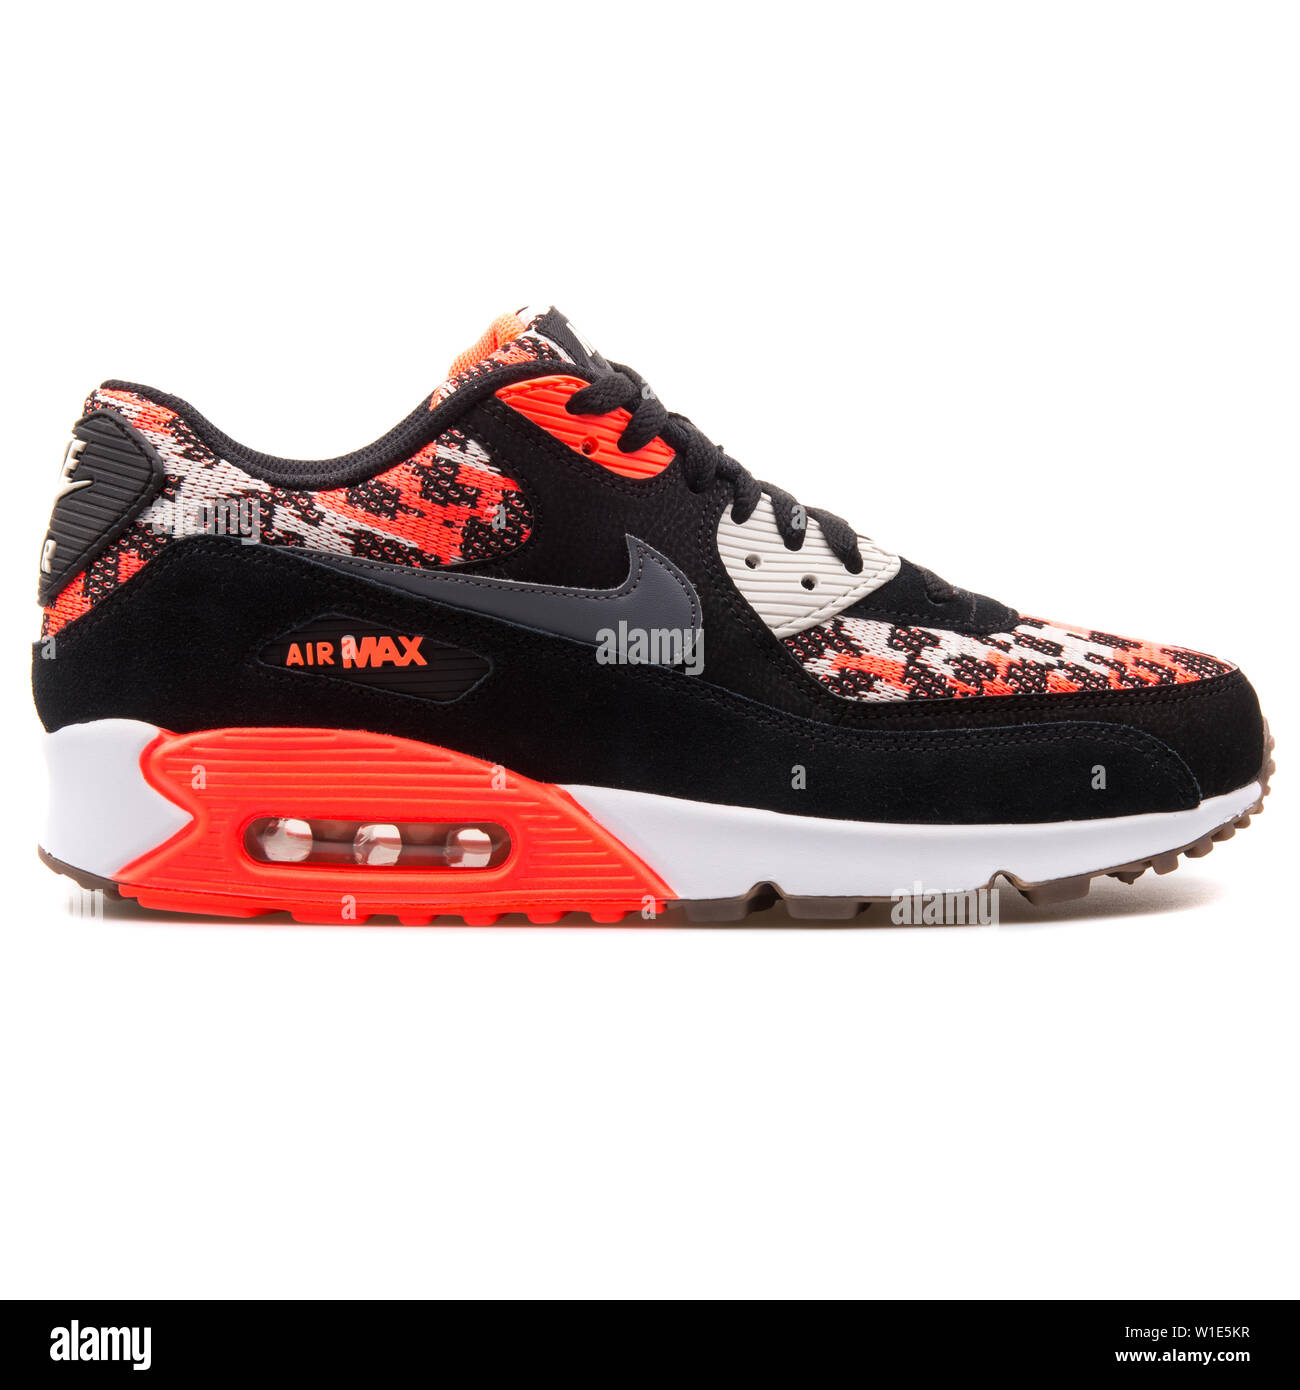 VIENNA, AUSTRIA - AUGUST 25, 2017: Nike Air Max 90 PA black and hot lava  red sneaker on white background Stock Photo - Alamy